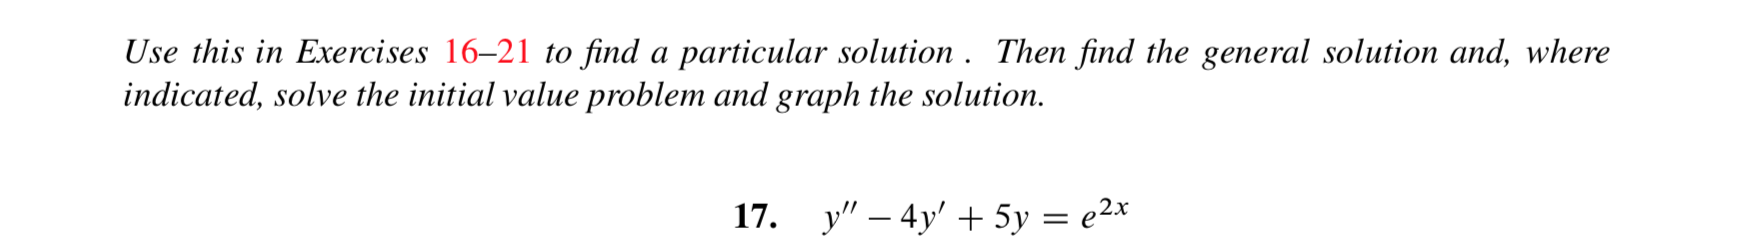 Use this in Exercises 16-21 to find a particular solution. Then find the general solution and, where
indicated, solve the initial value problem and graph the solution.
у" — 4y' + 5у — е2х
17.
= e
